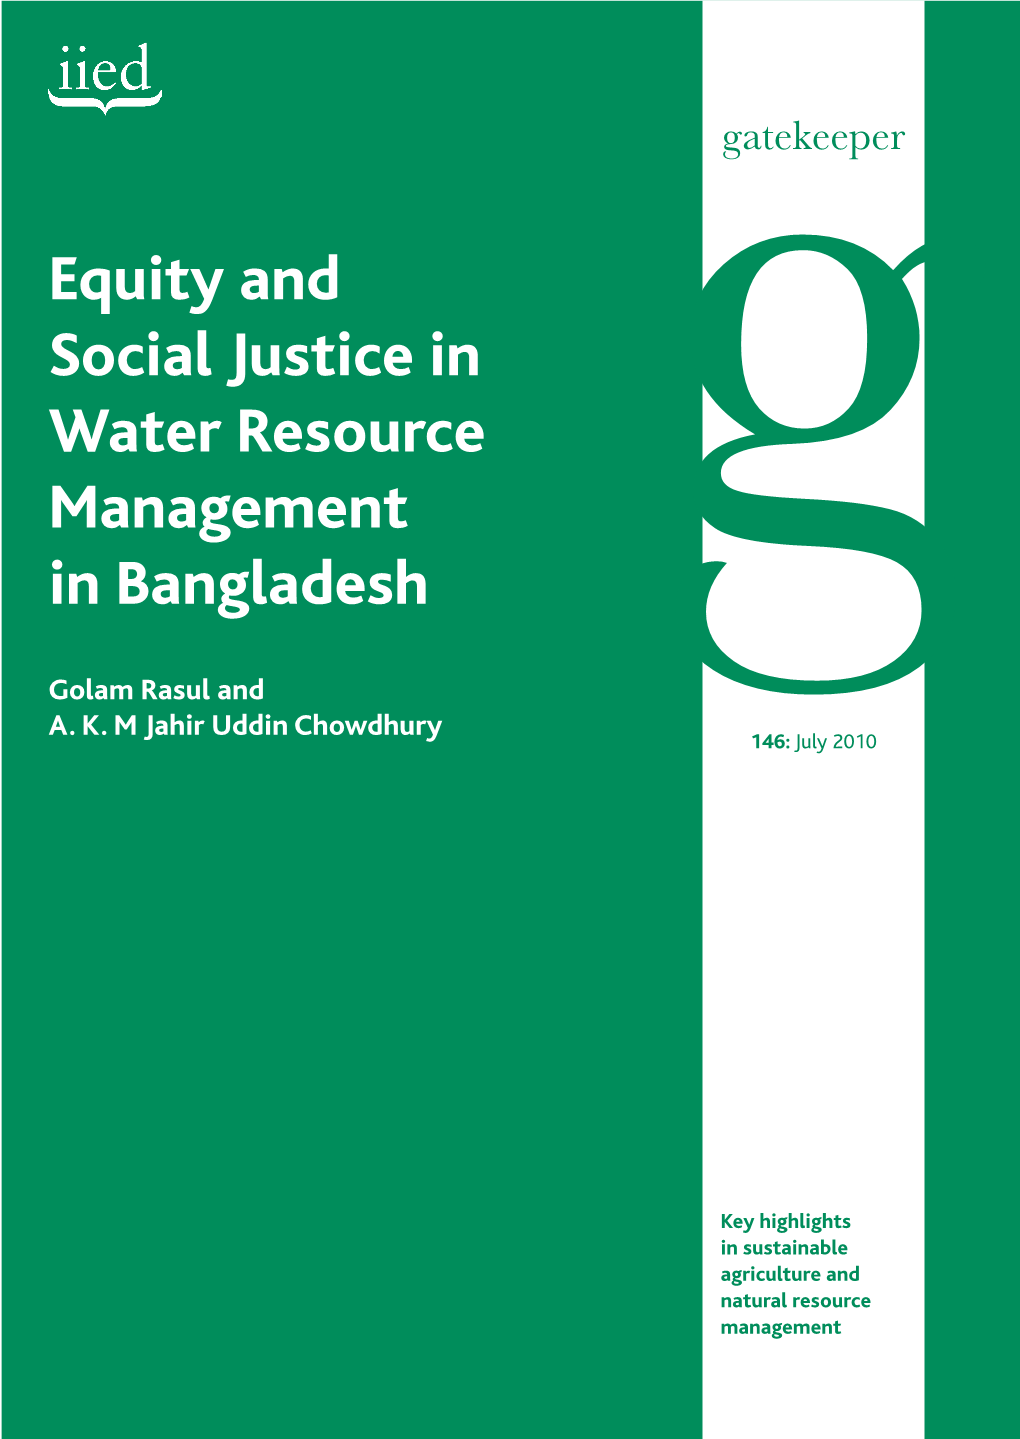 Equity and Social Justice in Water Resource Management in Bangladesh